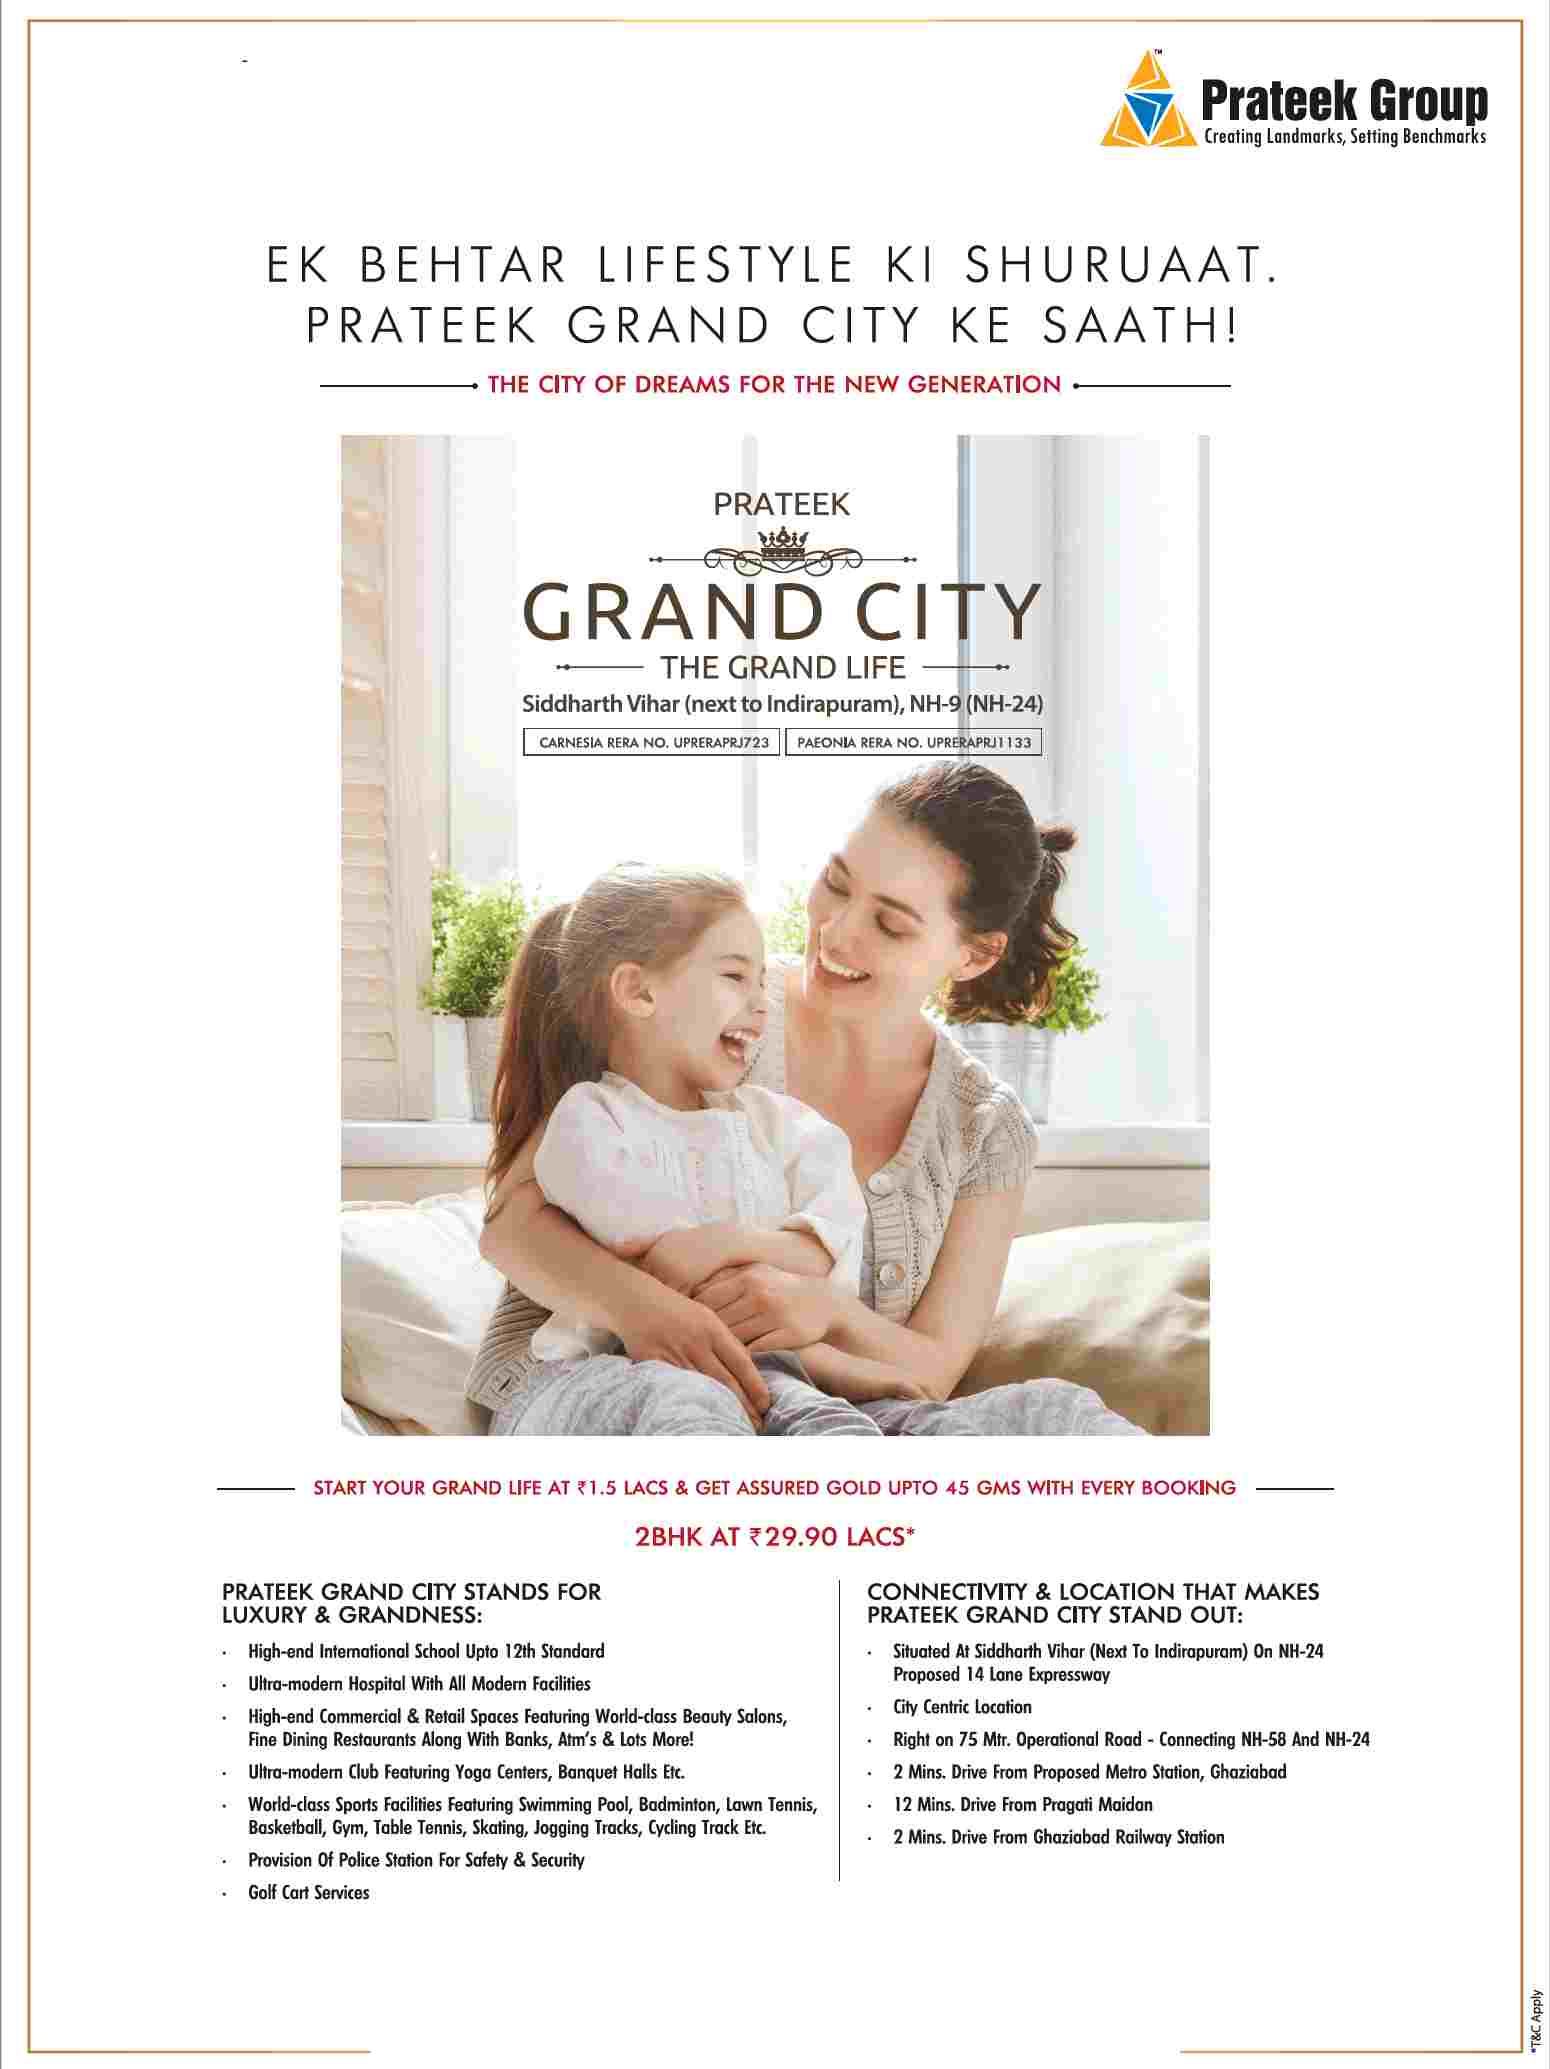 Start your grand life @ 1.5 lacs & get assured gold up to 45 gms with every booking at Prateek Grand City in Ghaziabad Update